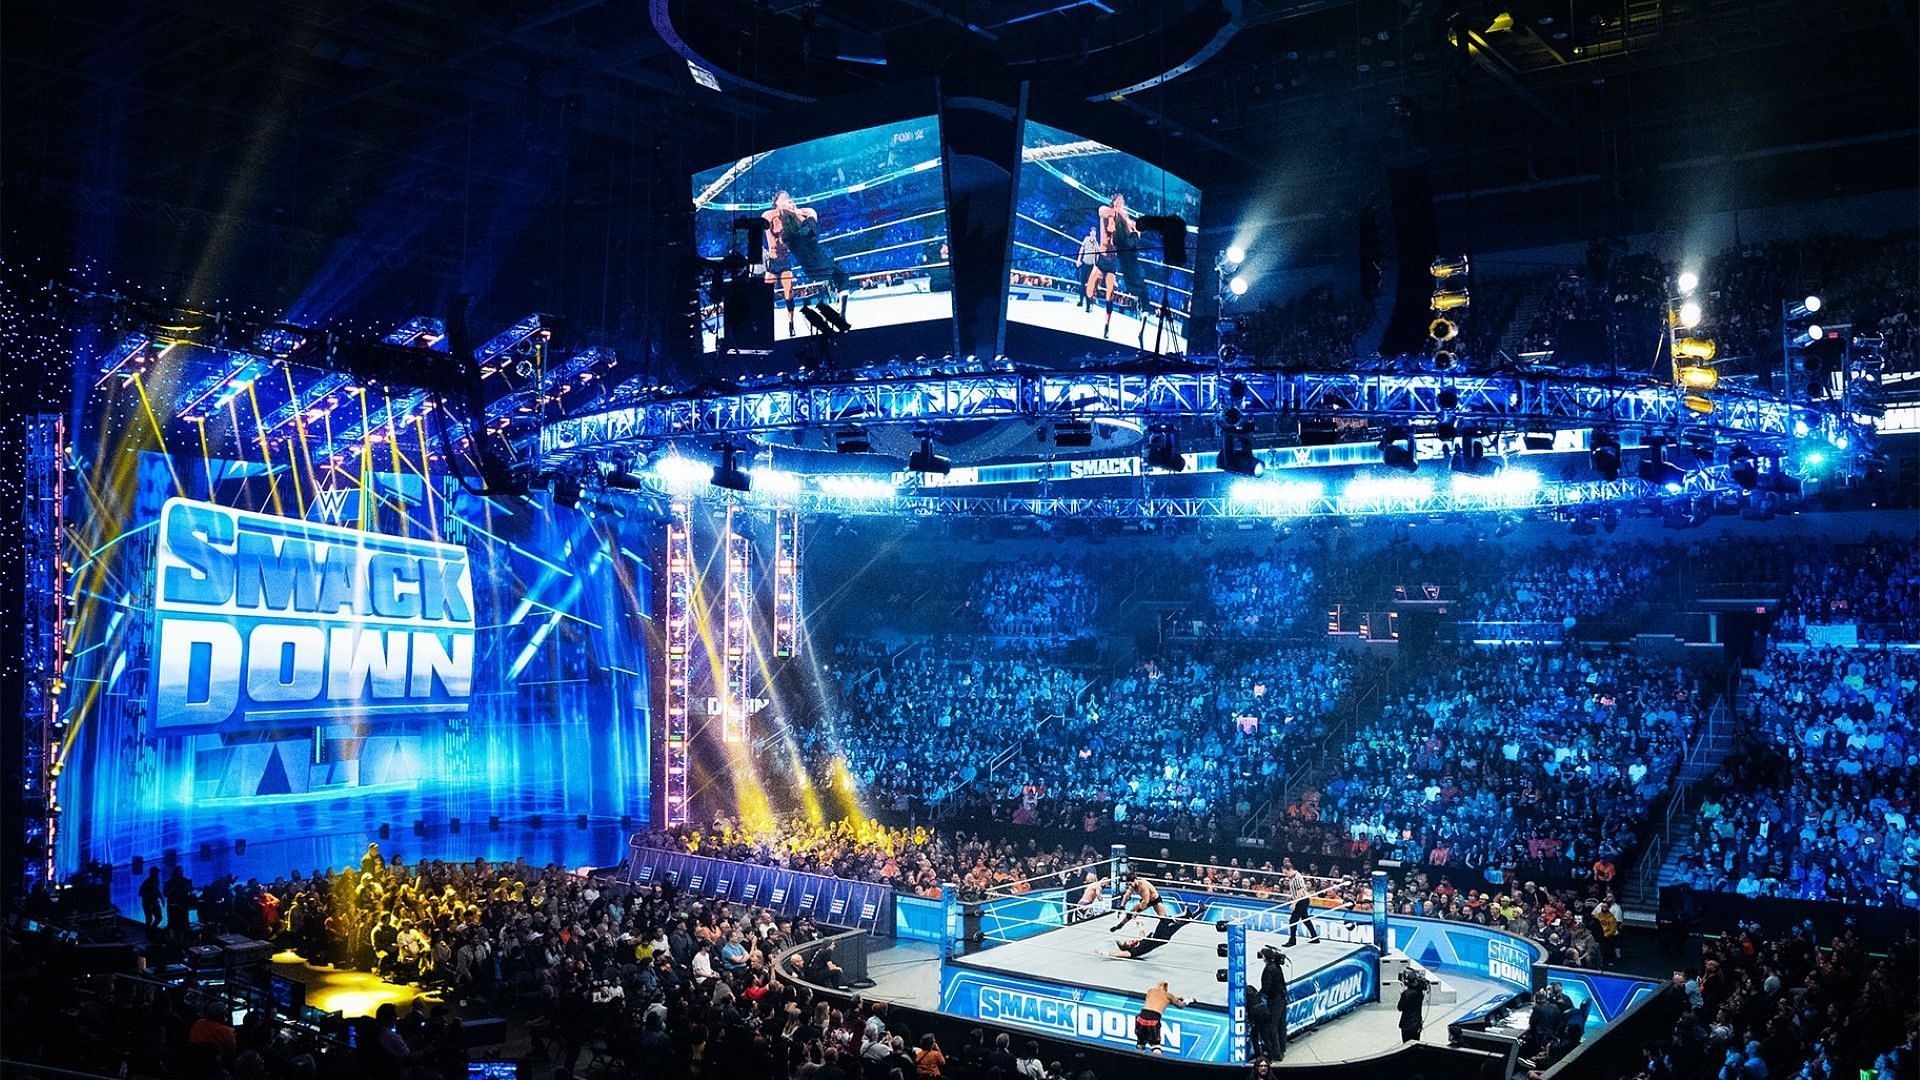 The WWE SmackDown ring and stage/set on display inside arena